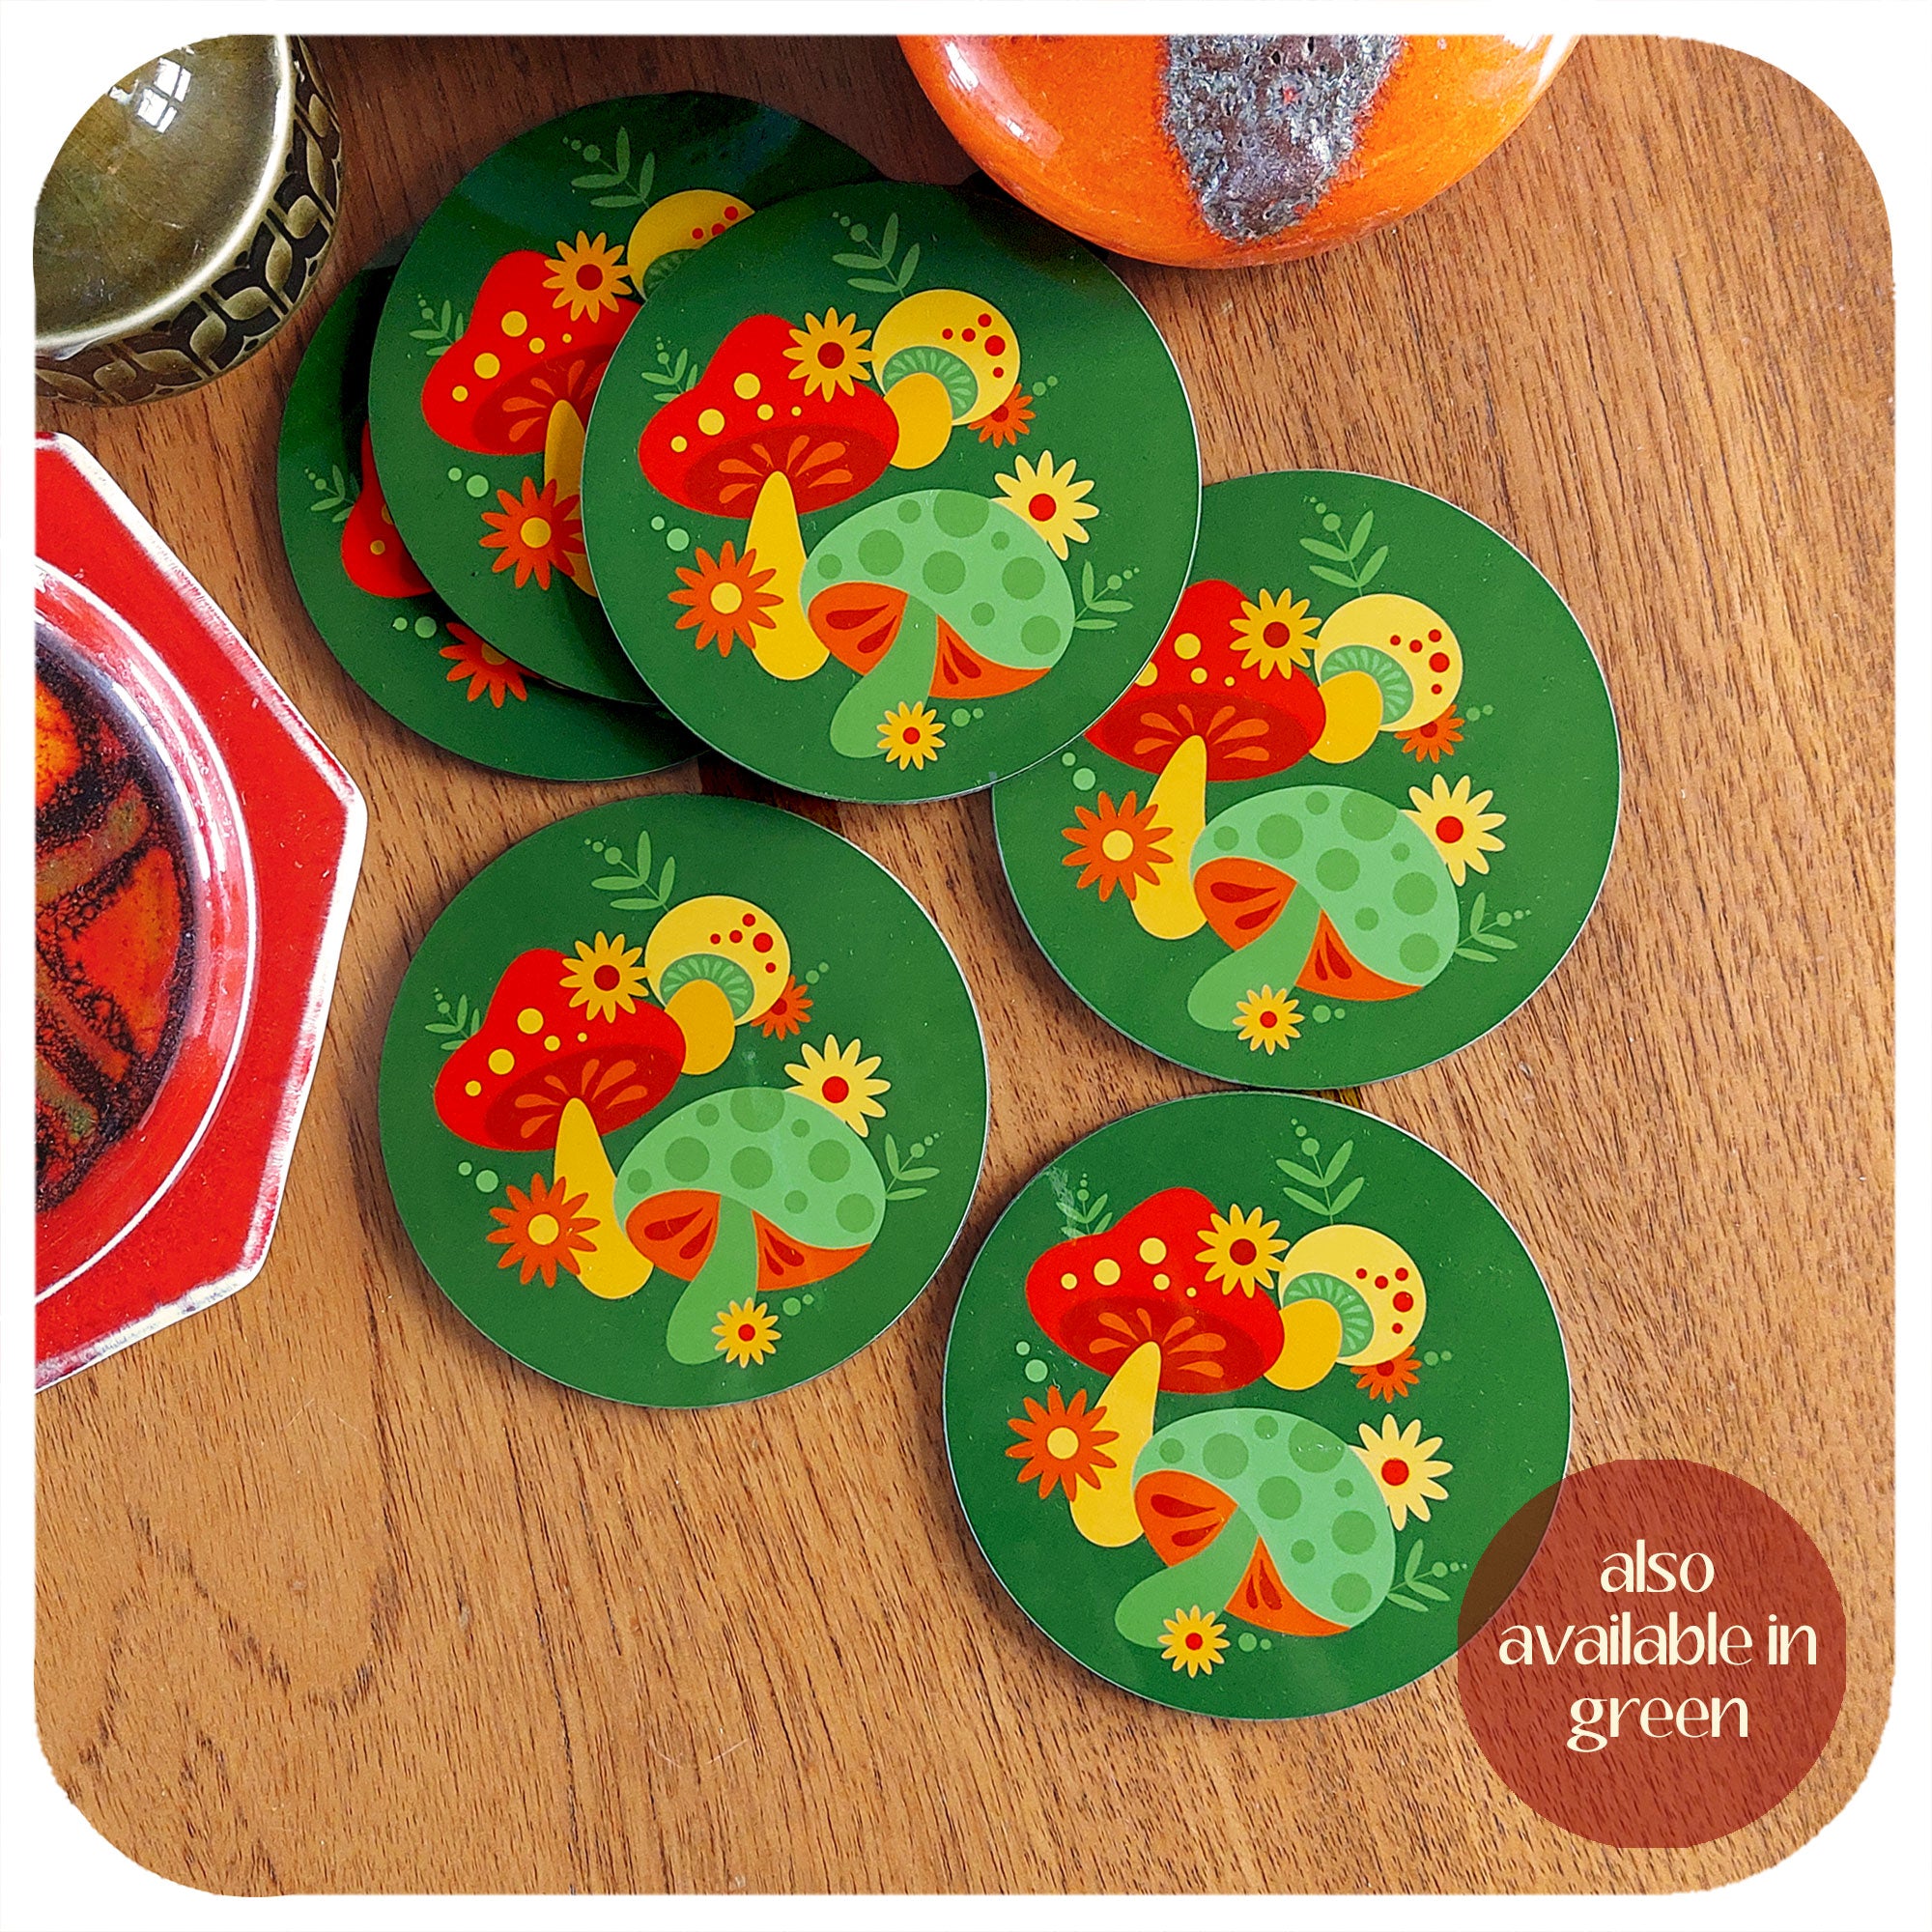 A set of 6 green 70s style coasters lie in a scattered pile on a teak table. Text in the lower right hand corner reads: also available in green | The Inkabilly Emporium